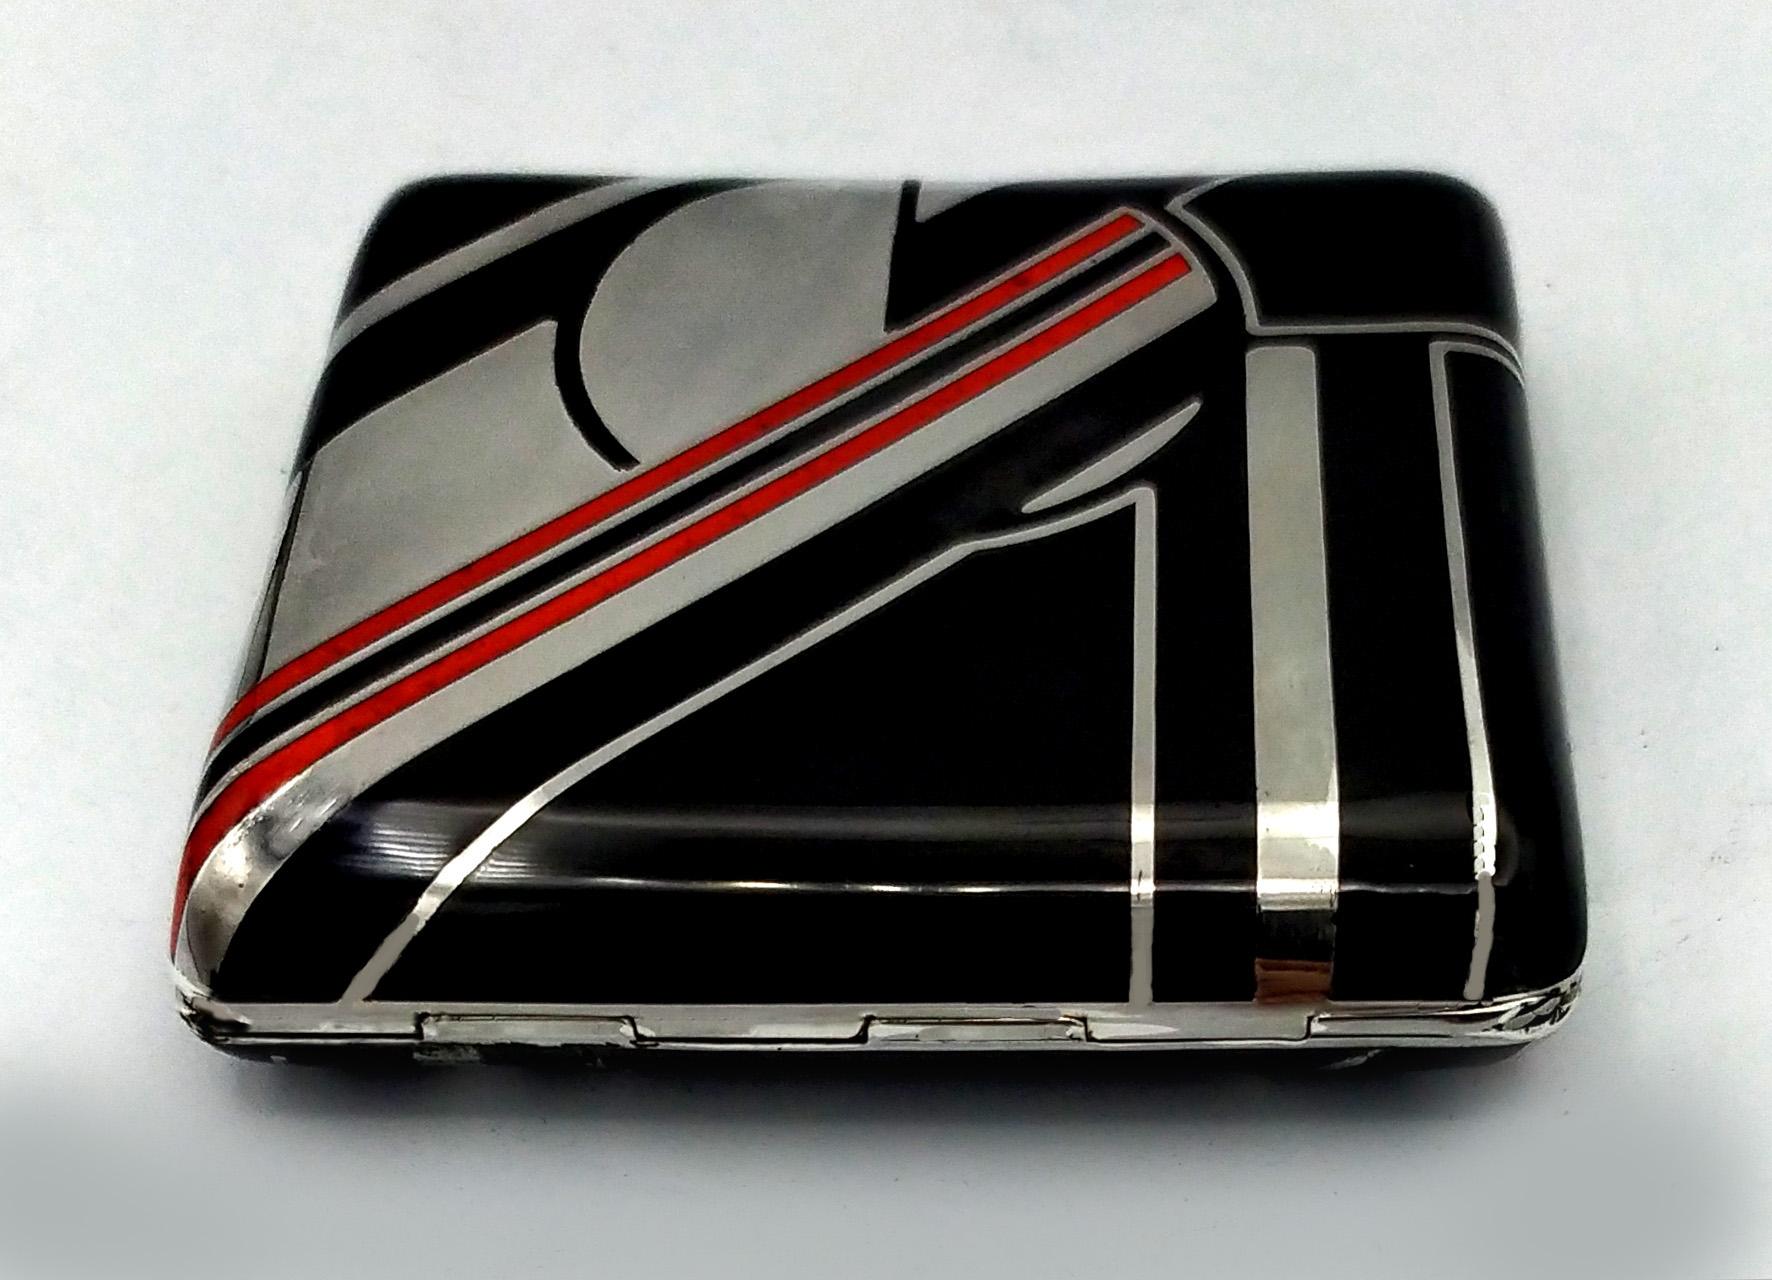 Powder Case Art Deco style designed for Cartier USA Sterling Silver Salimbeni  In Excellent Condition For Sale In Firenze, FI